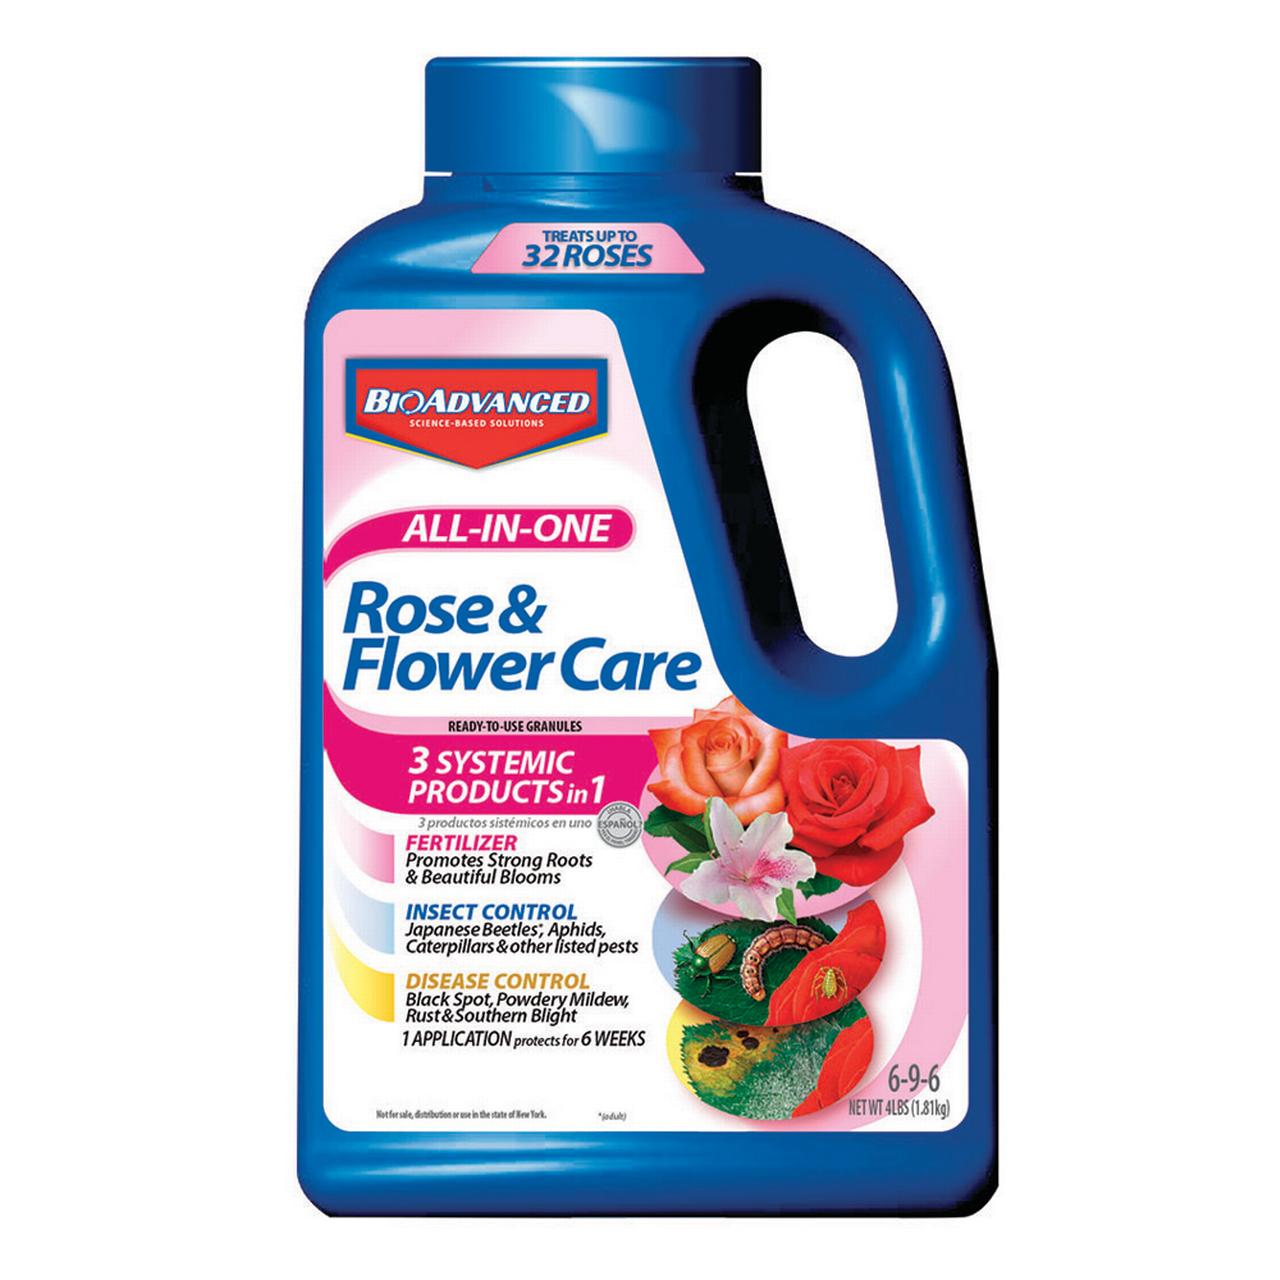 BioAdvanced All-In-One Rose & Flower Care, Granules, 4 Lbs - image 1 of 8